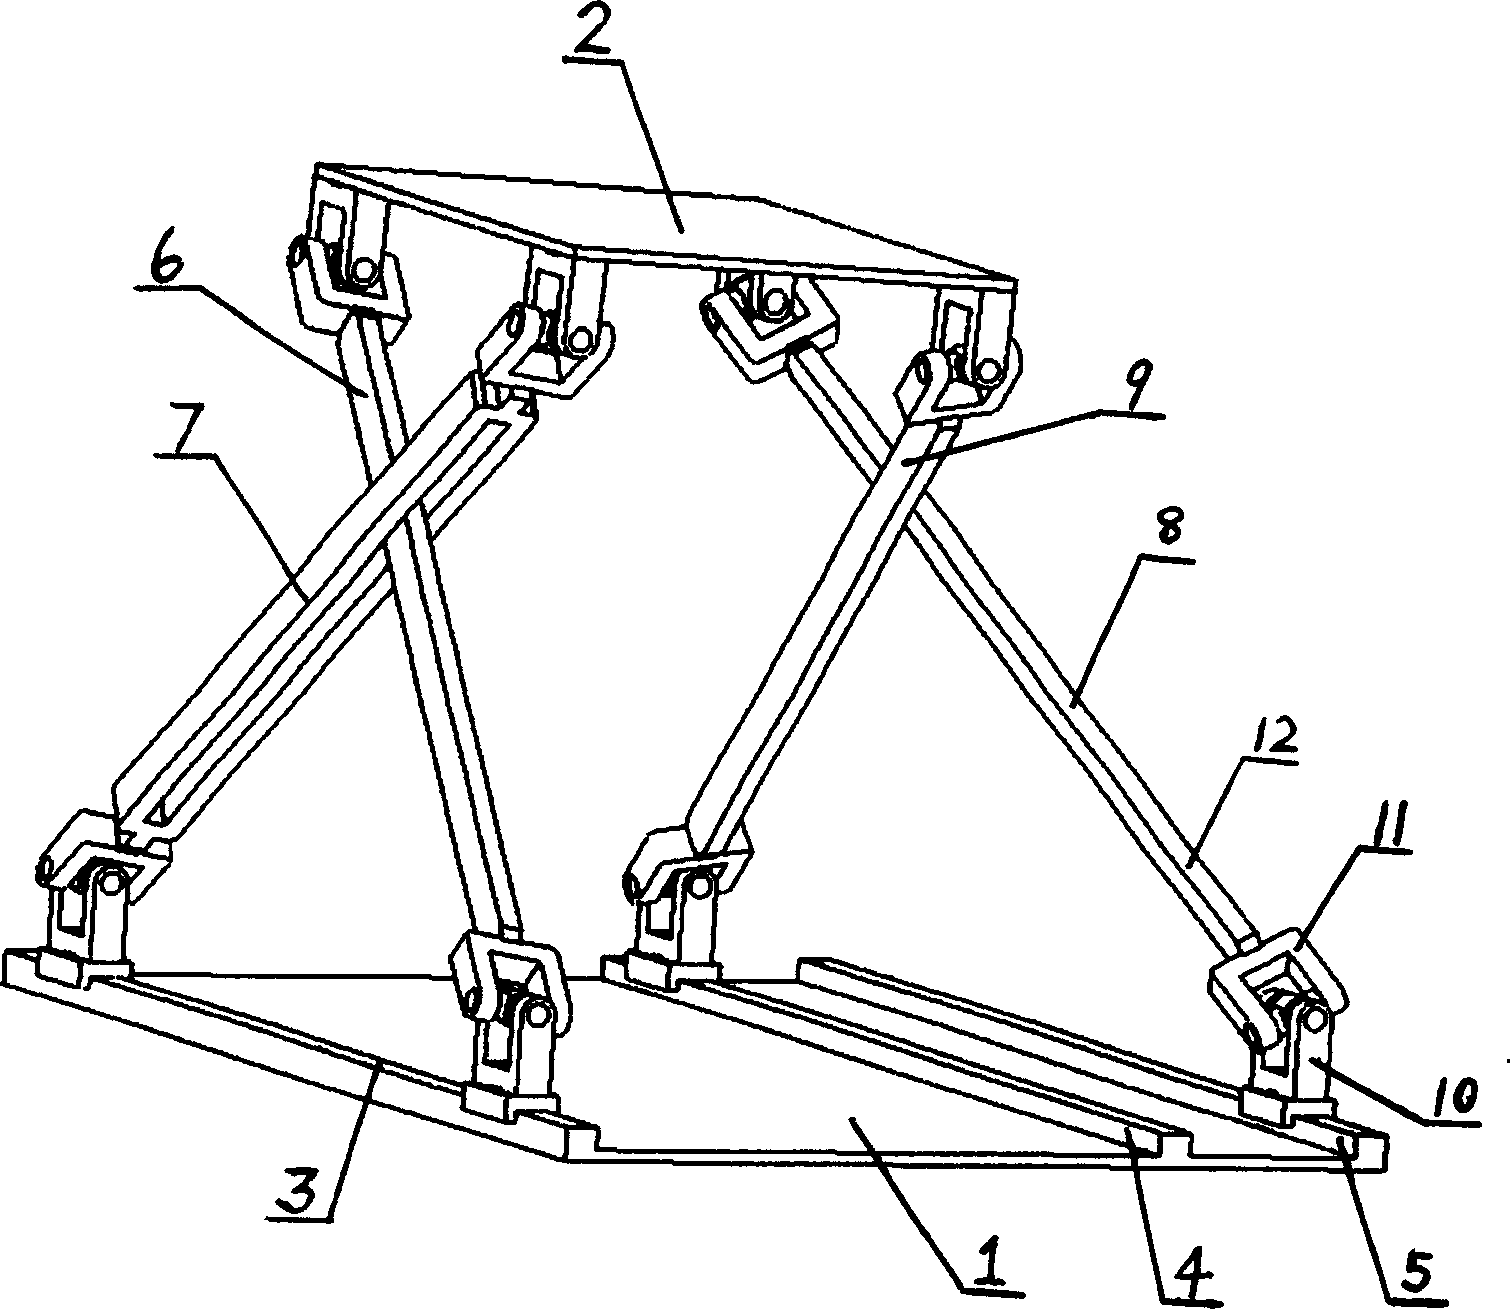 Four-freedom parallel robot mechanism with three translational dimensions and one rotational dimension